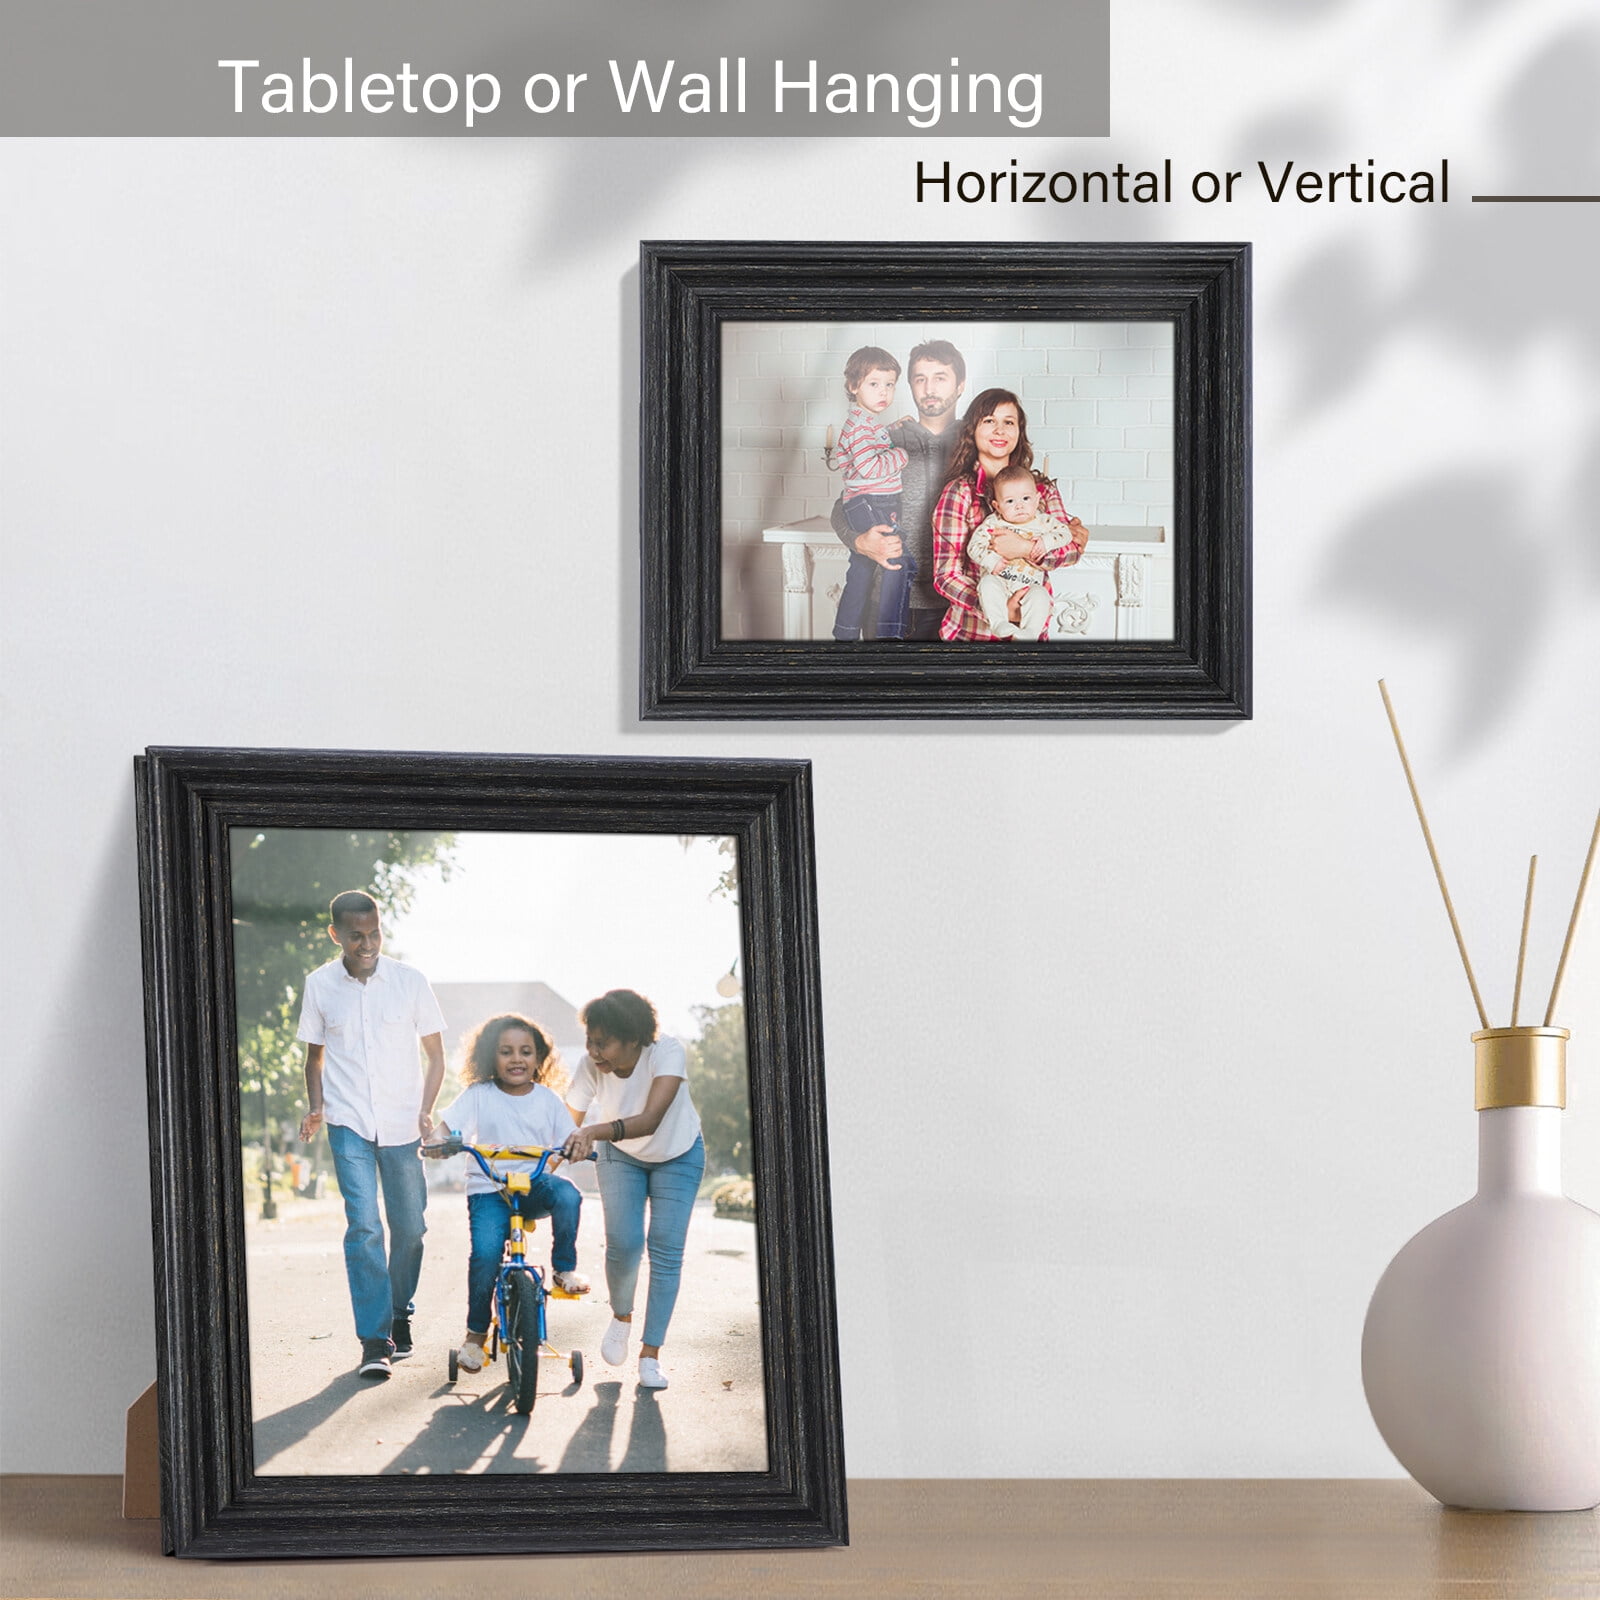 Small Boulevard Set of 11 Individual Wall Photo Frames Wall Decor Set (  Size 4x6, 5x5, 6x8, 8x10 inches )